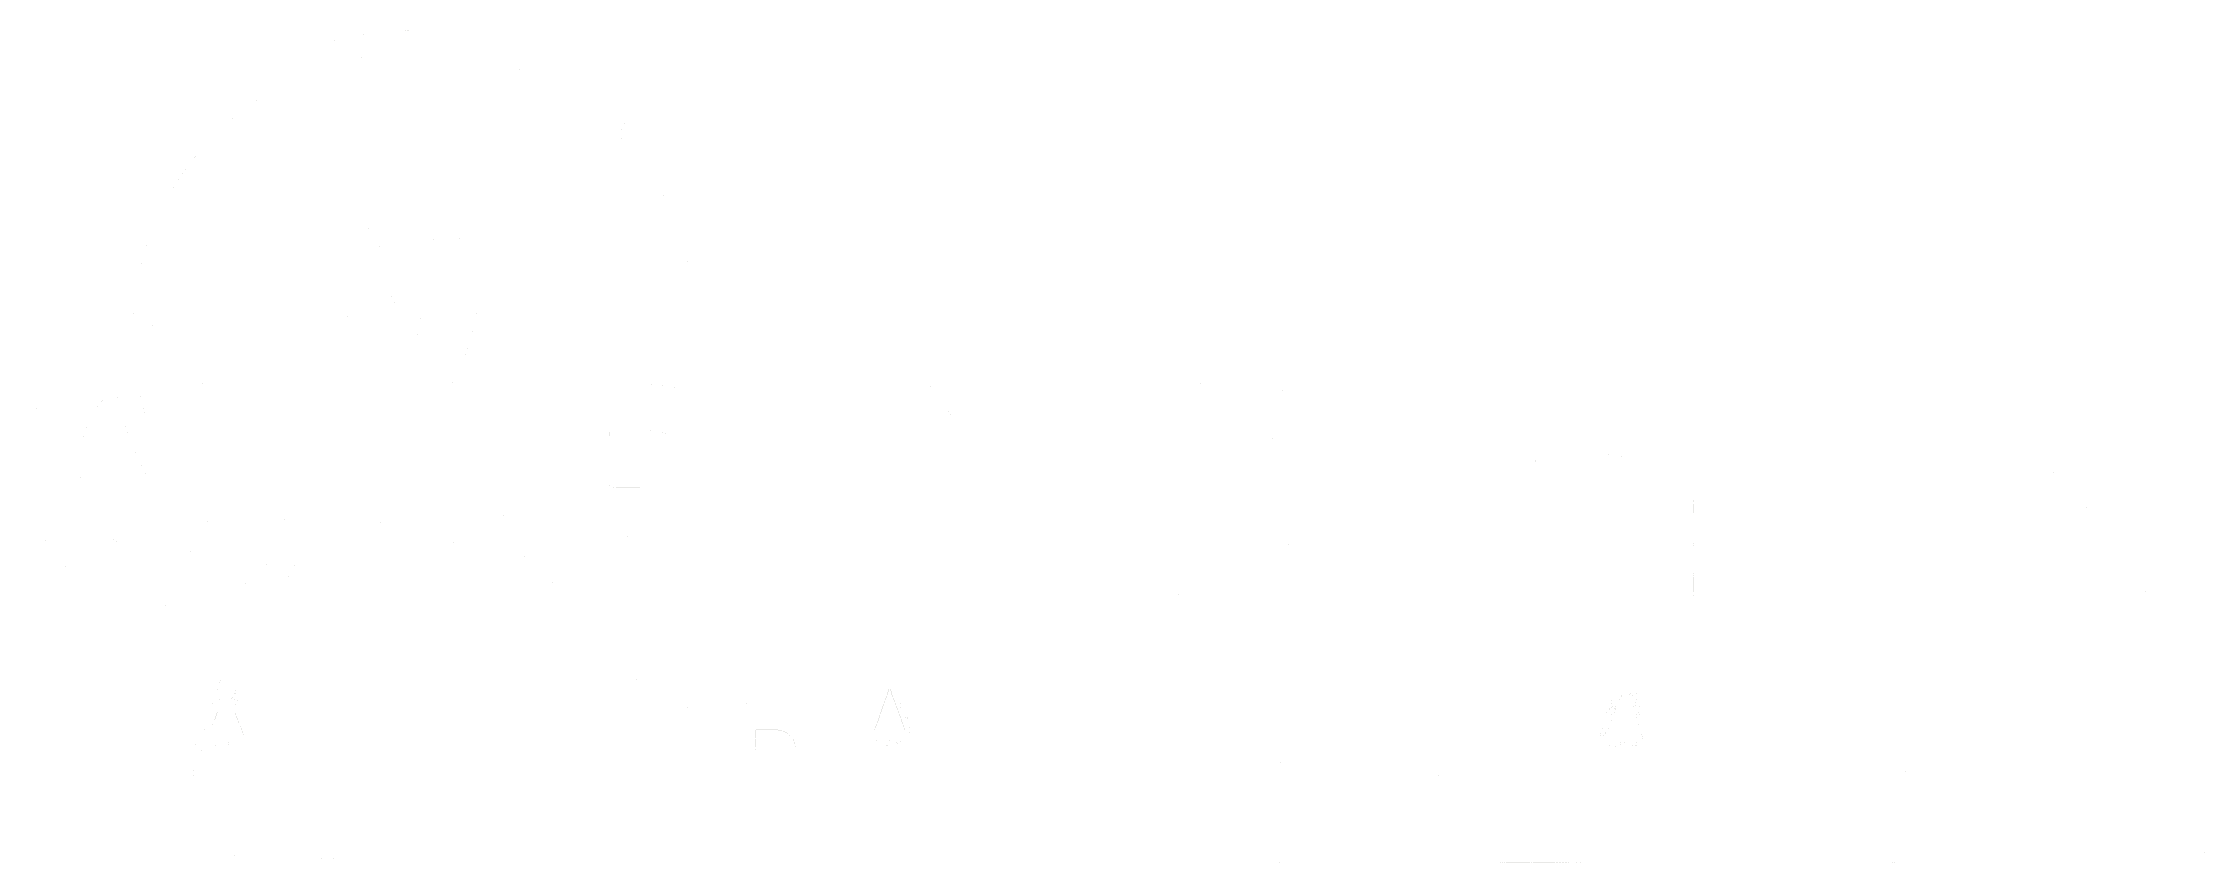 A green and white logo for spring news global initiative.